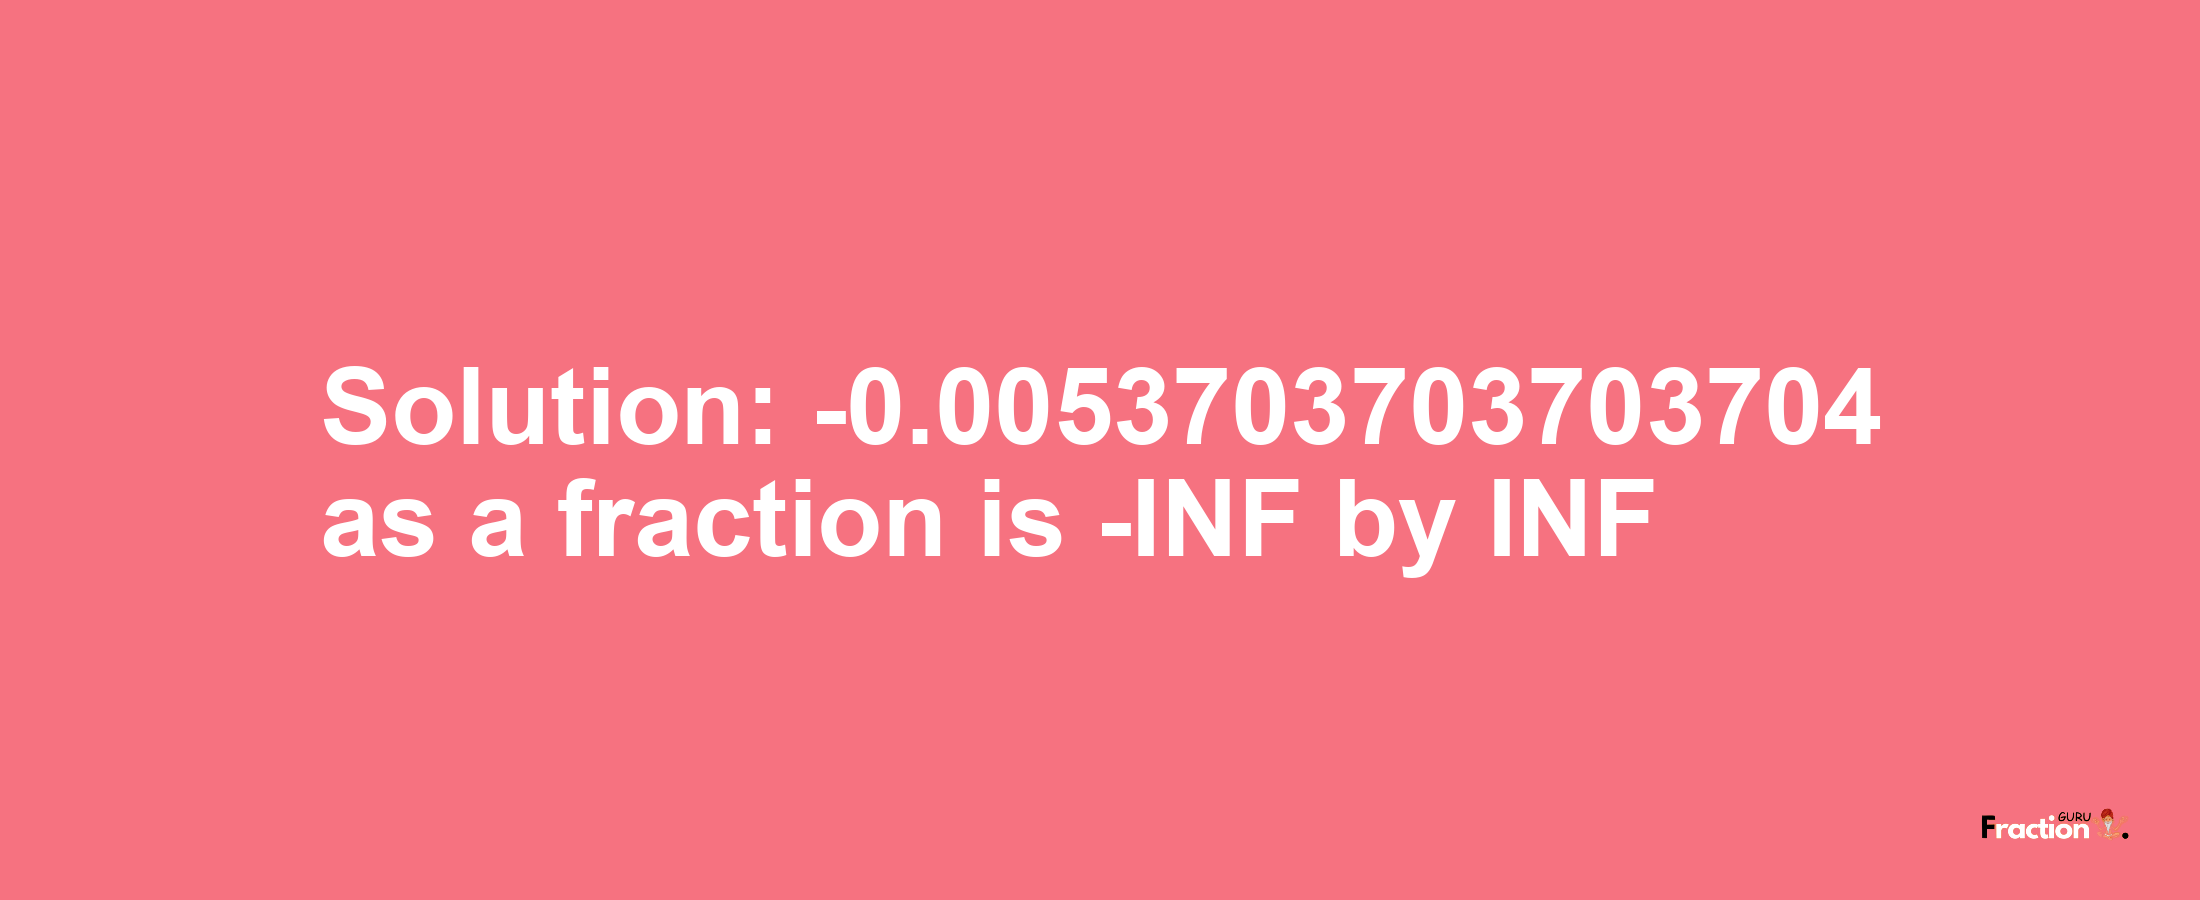 Solution:-0.0053703703703704 as a fraction is -INF/INF